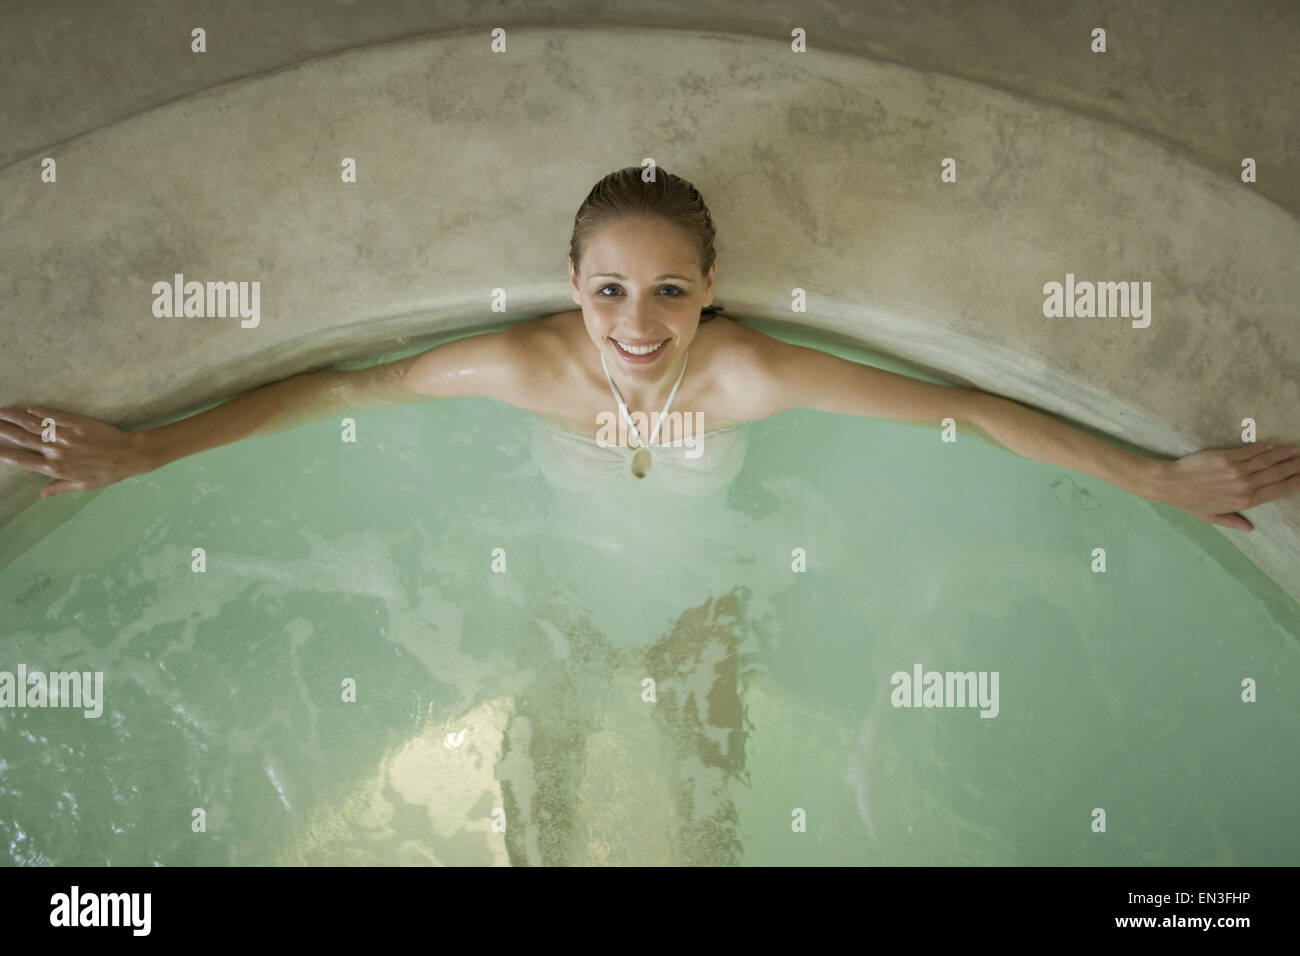 Woman in hot tub indoors Stock Photo